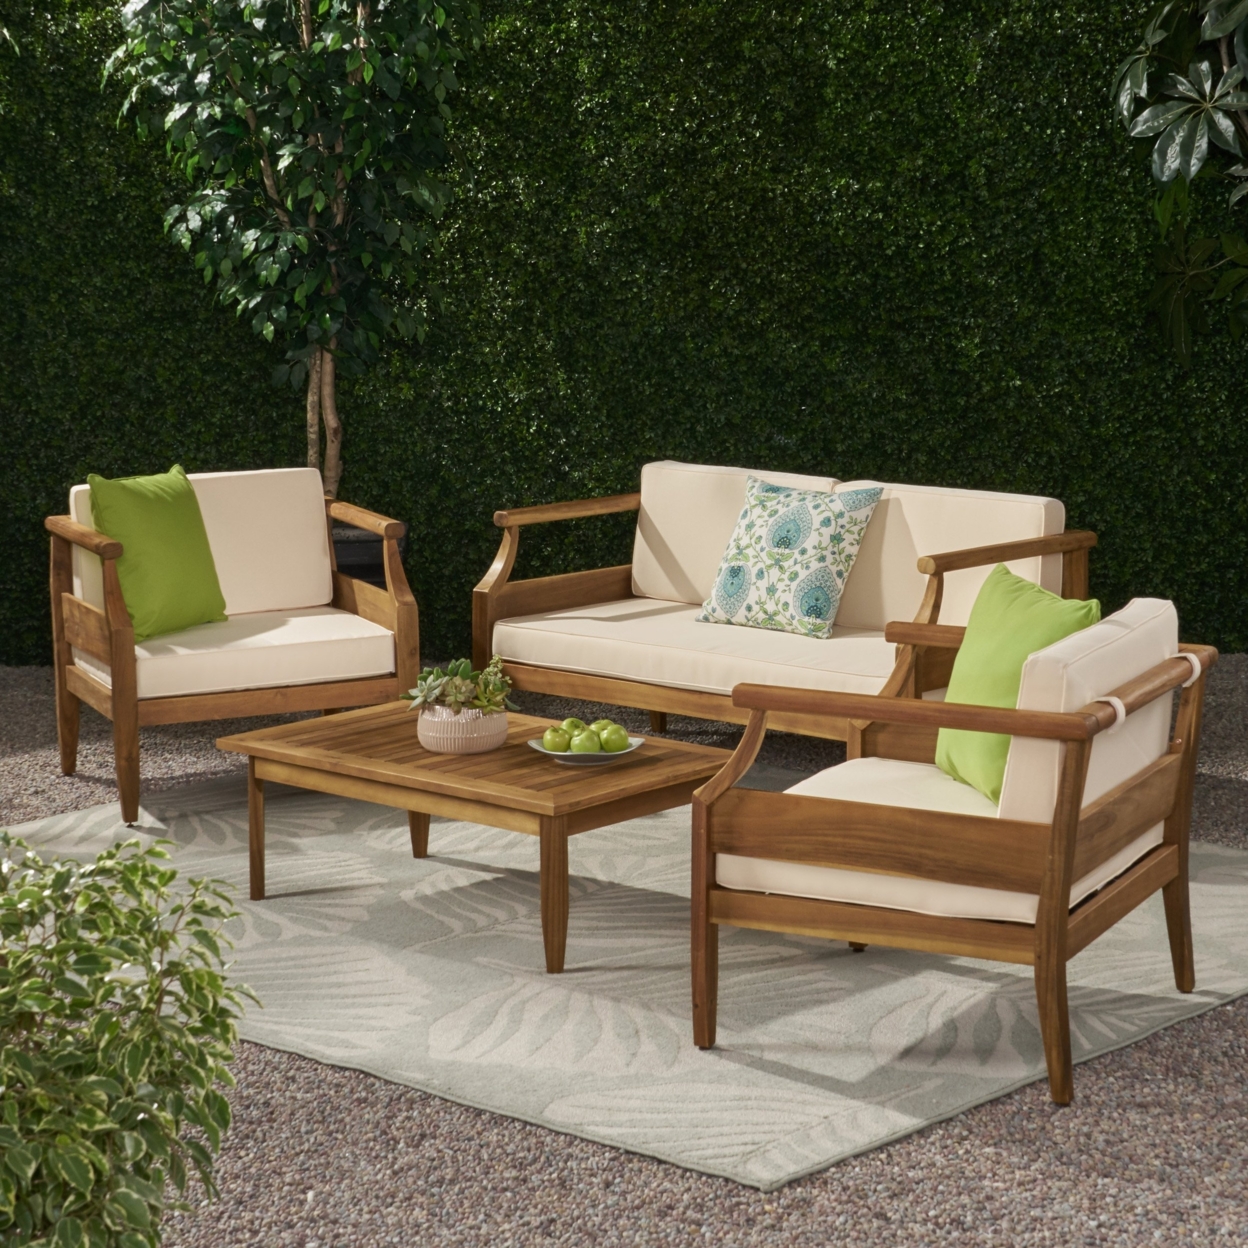 Bianca Outdoor Mid-Century Modern Acacia Wood 4 Seater Chat Set With Cushions - Cream